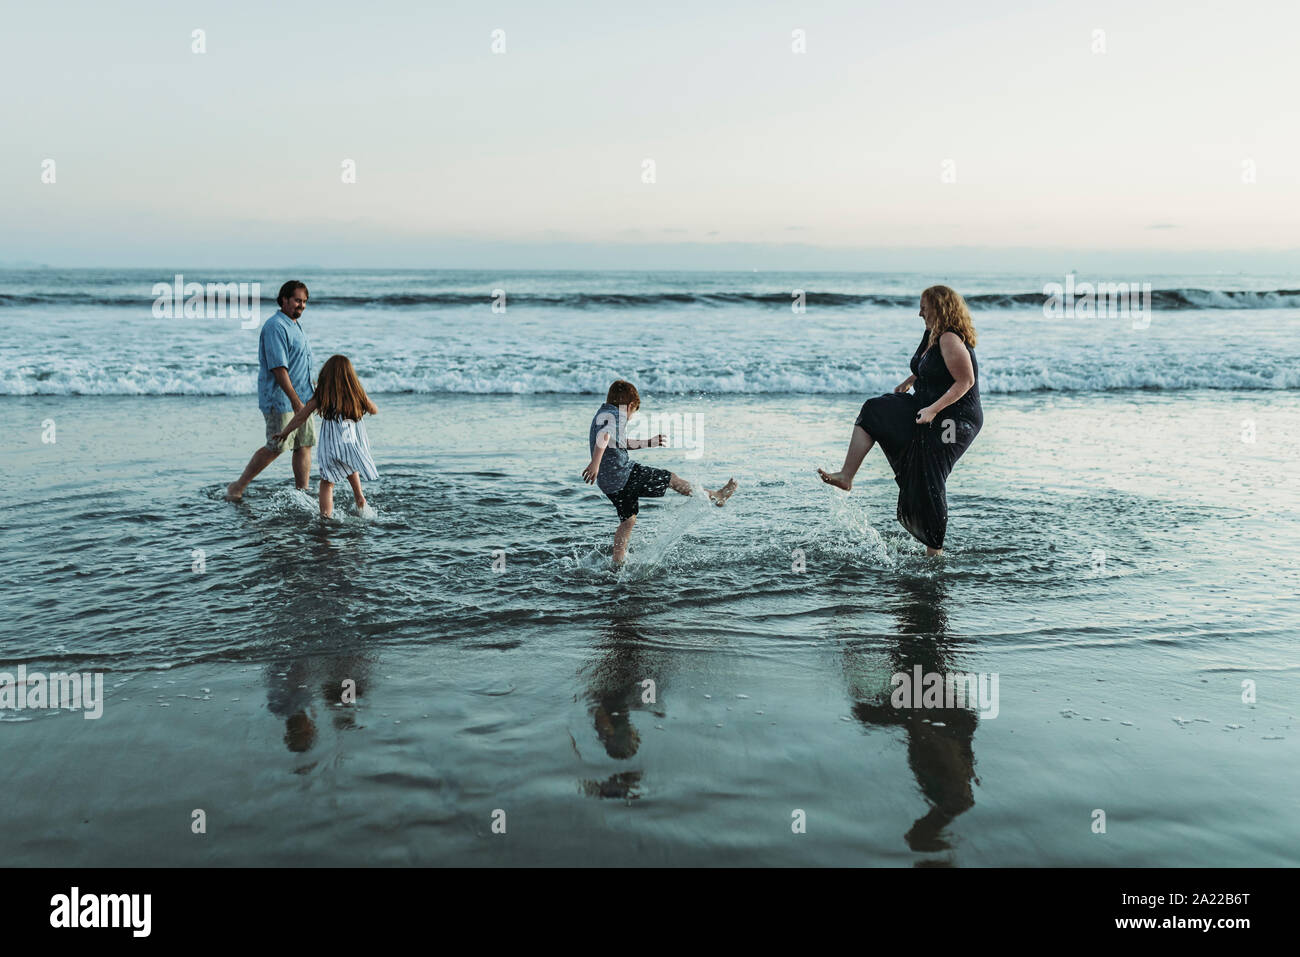 Family of four playing and splashing each other in ocean at dusk Stock Photo